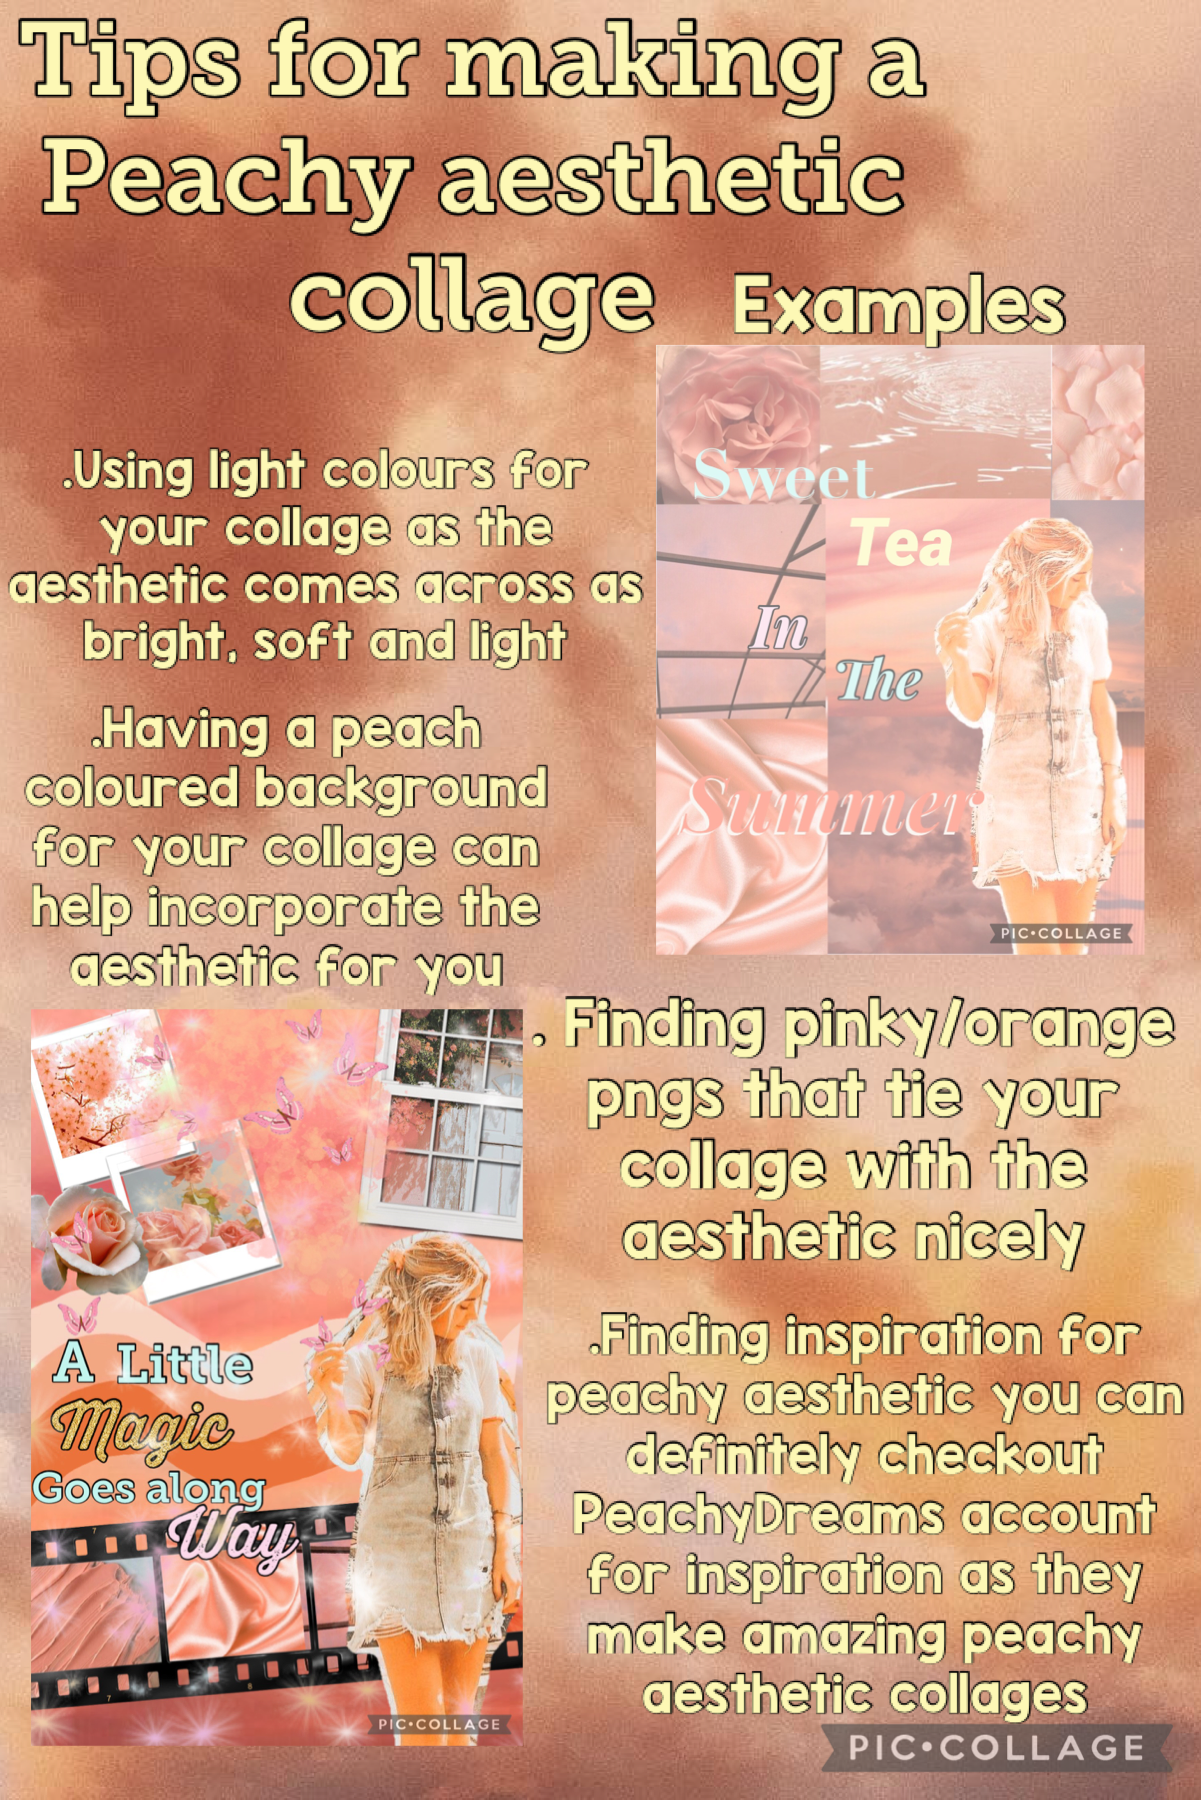 Tips for making aPeachy aesthetic collage 